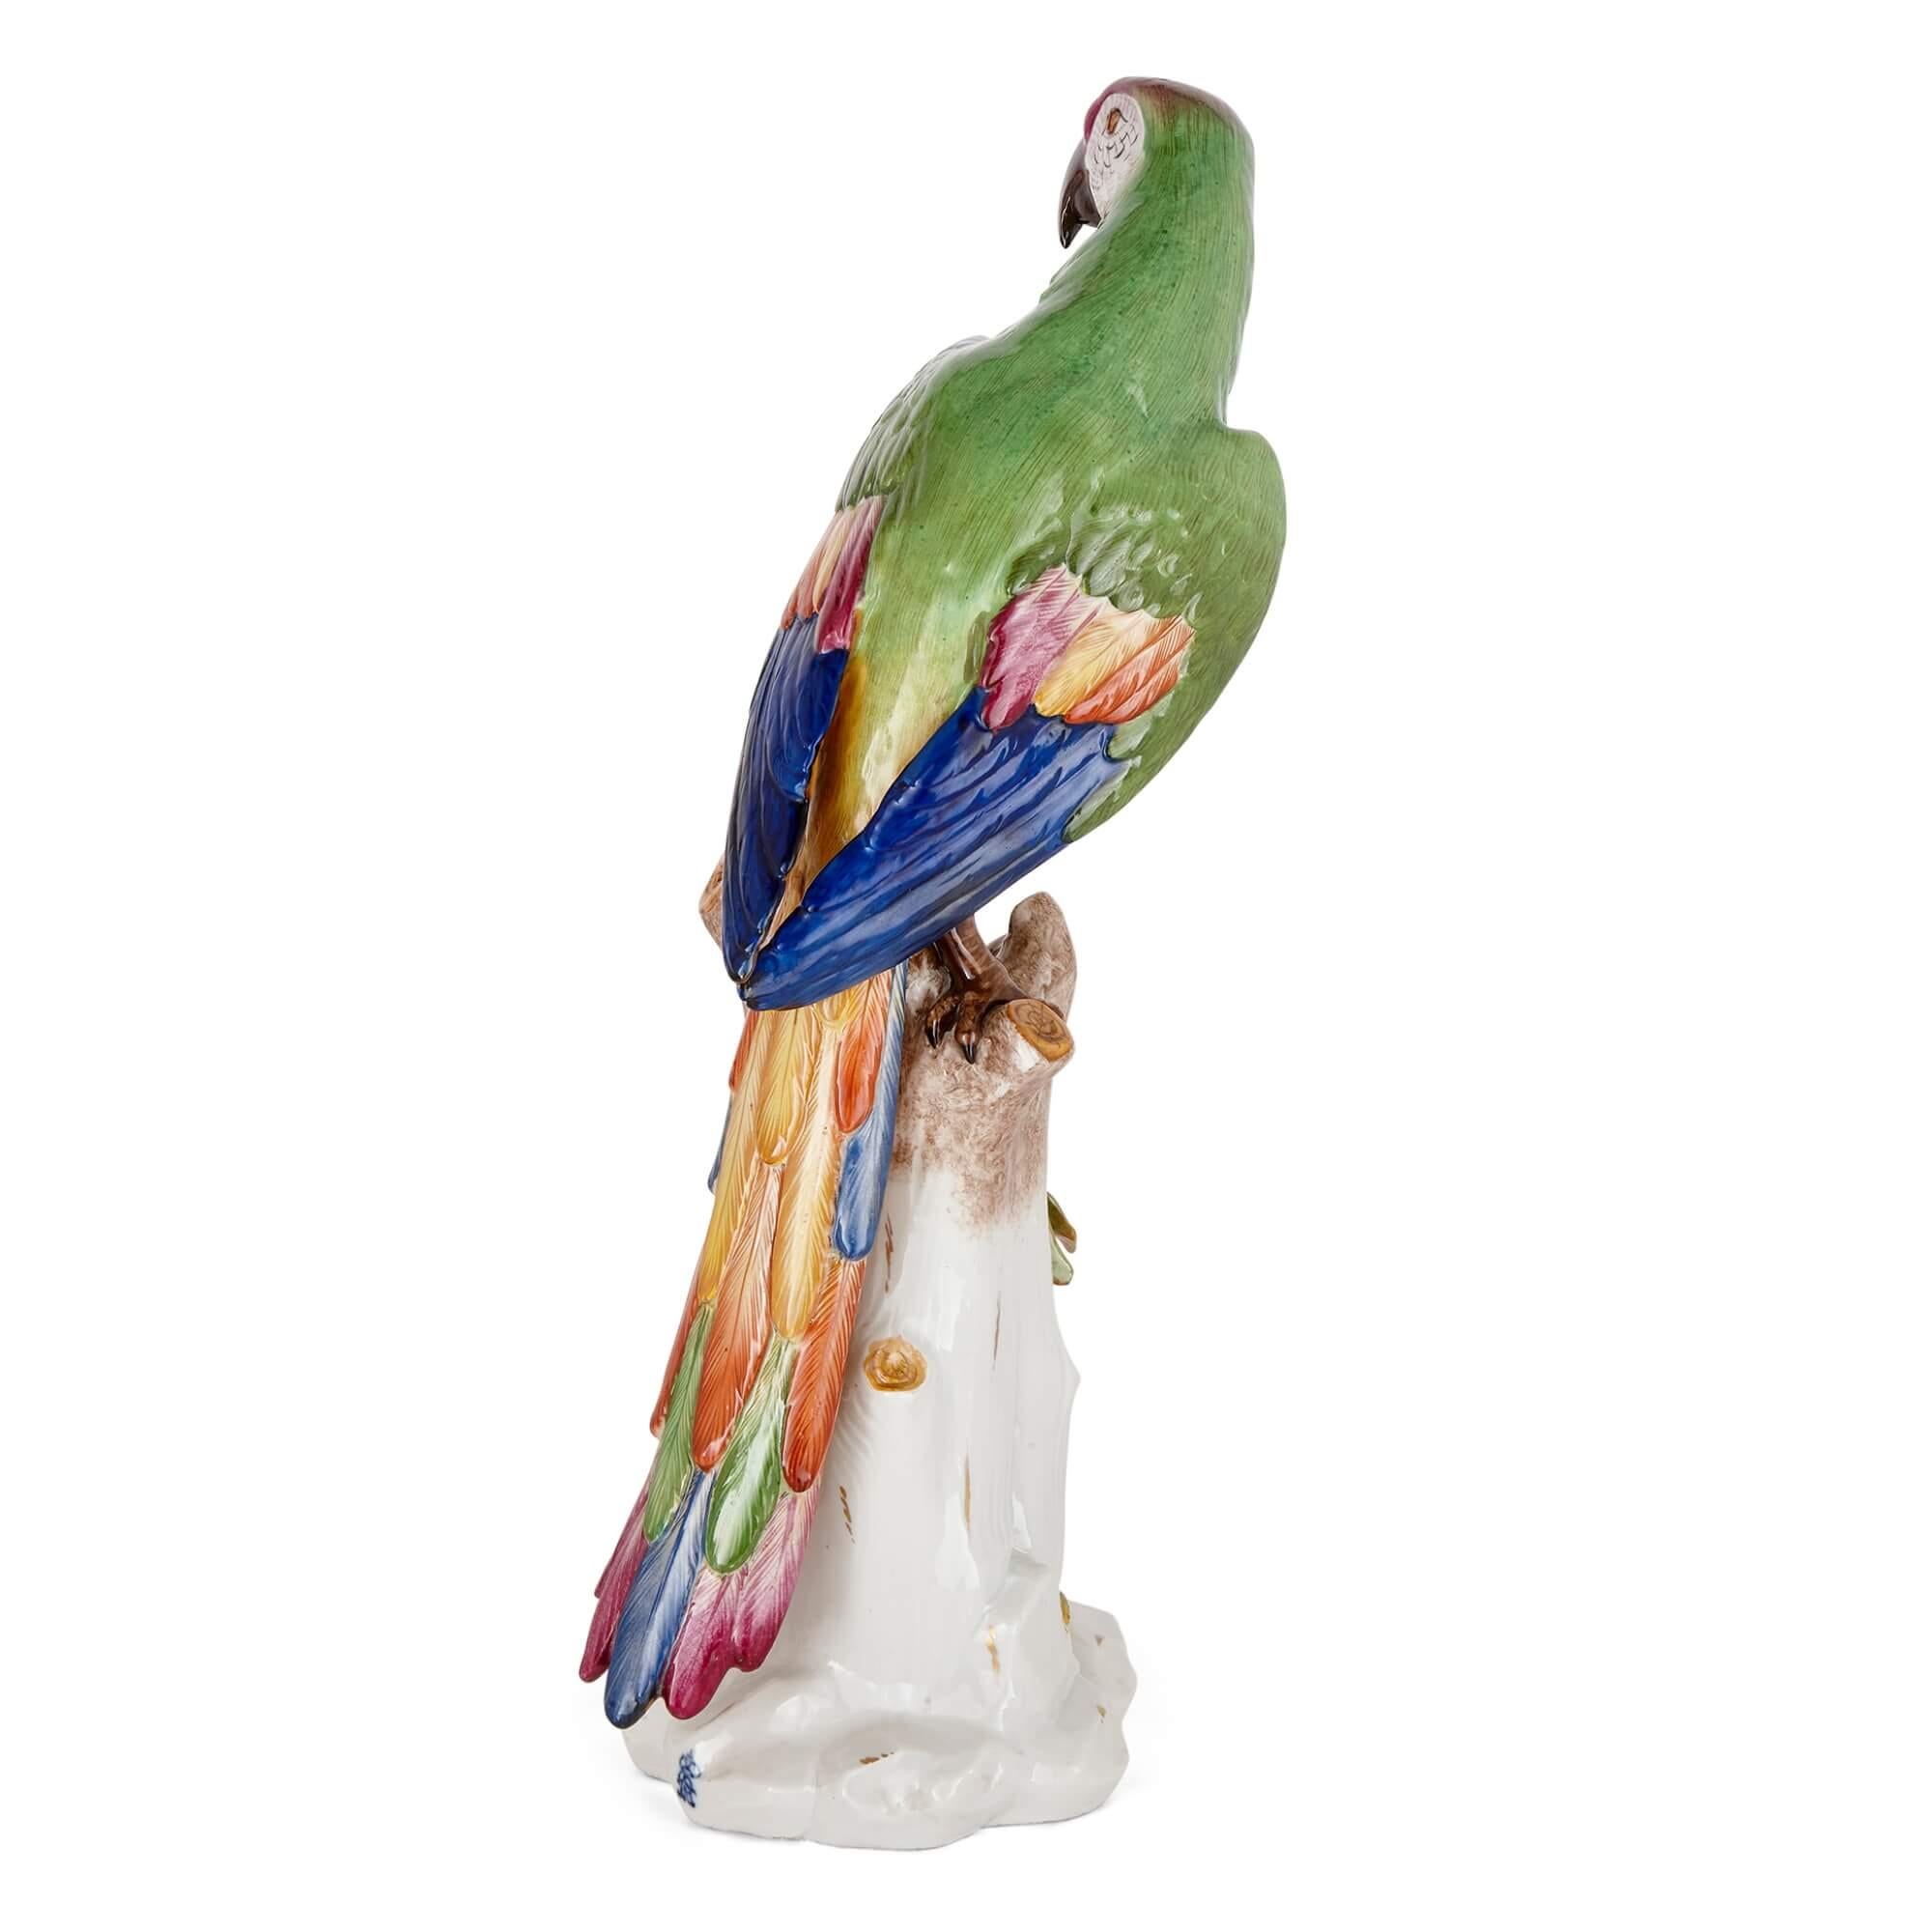 German Very Large Volkstedt Porcelain Sculpture of a Parrot For Sale